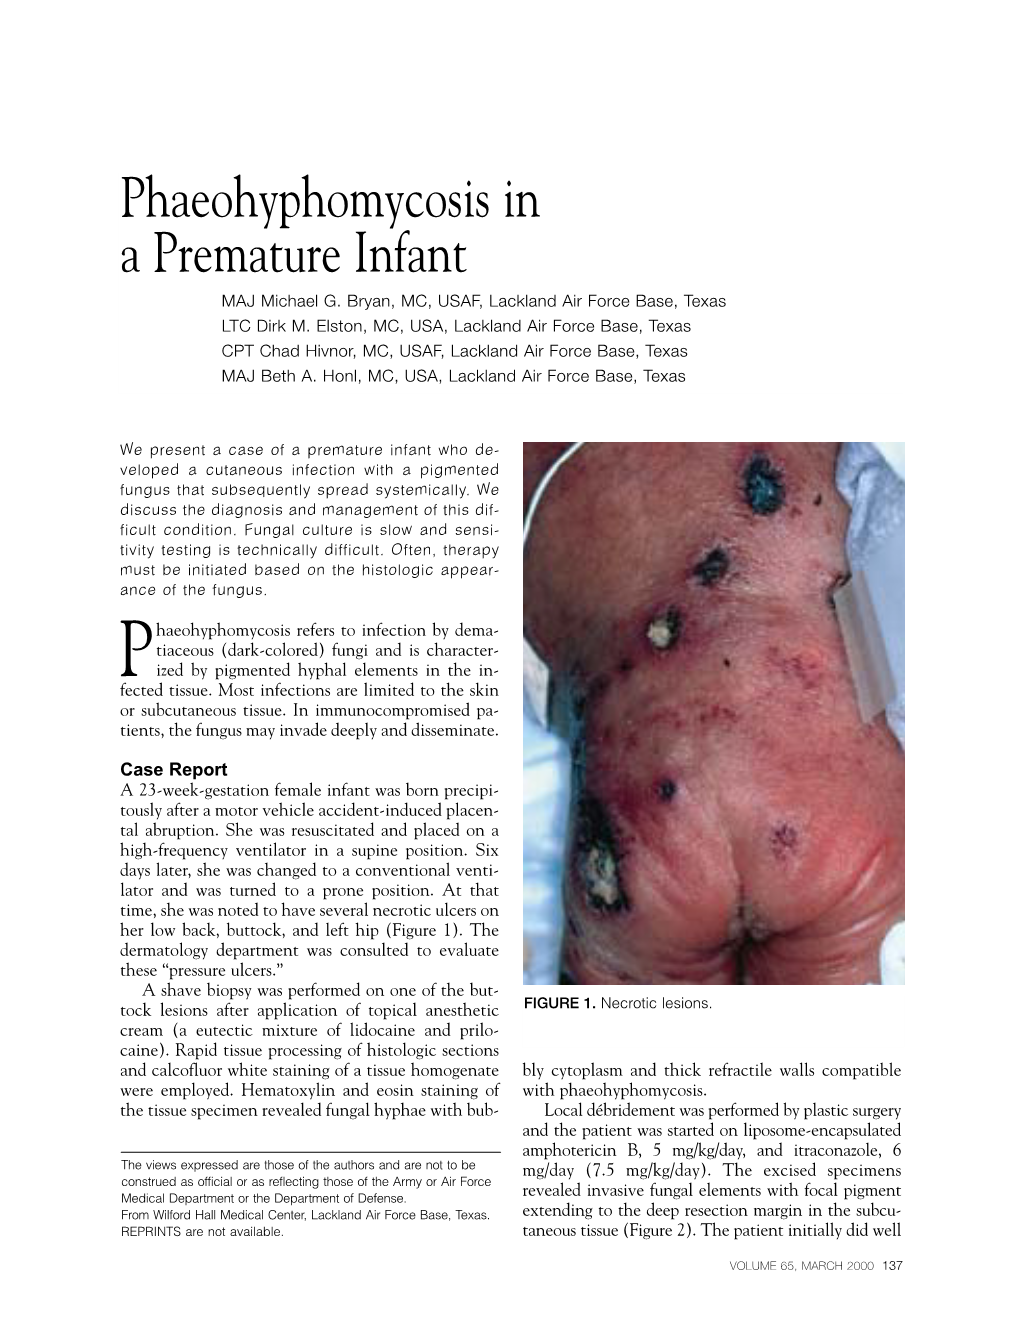 Phaeohyphomycosis in a Premature Infant MAJ Michael G